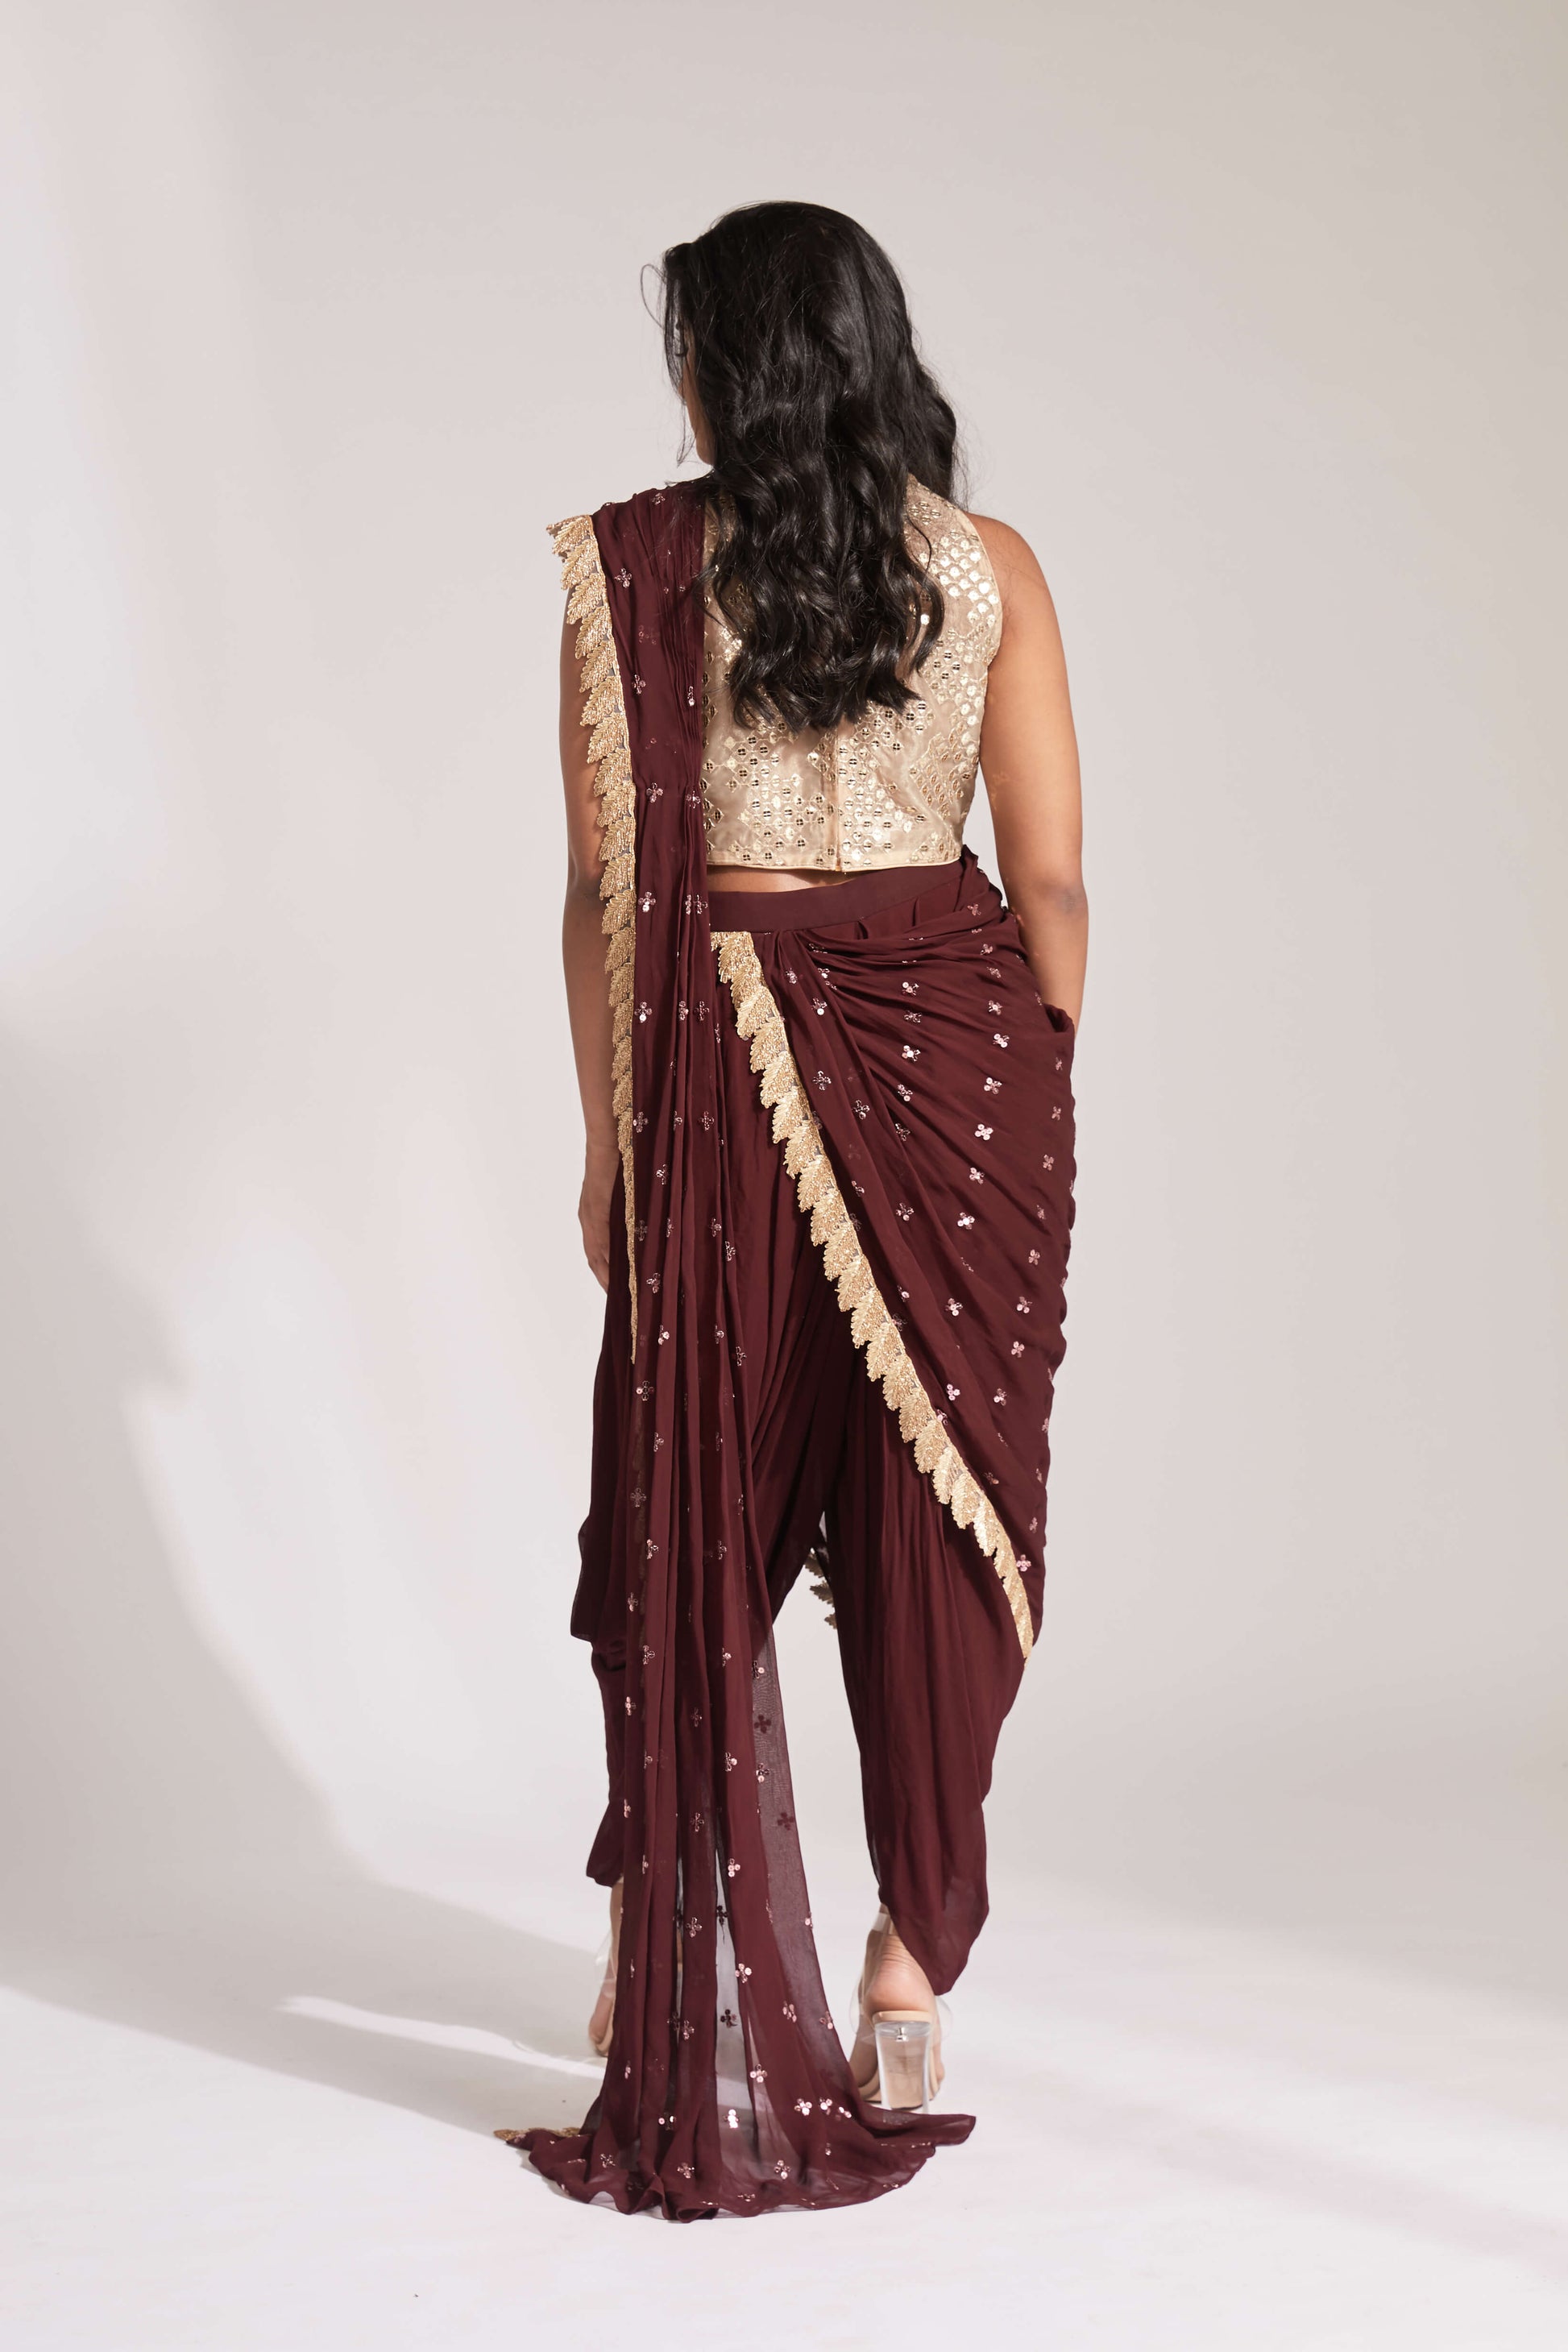 Dhoti pant outfit with attached drape and nude mirror work halter-style blouse